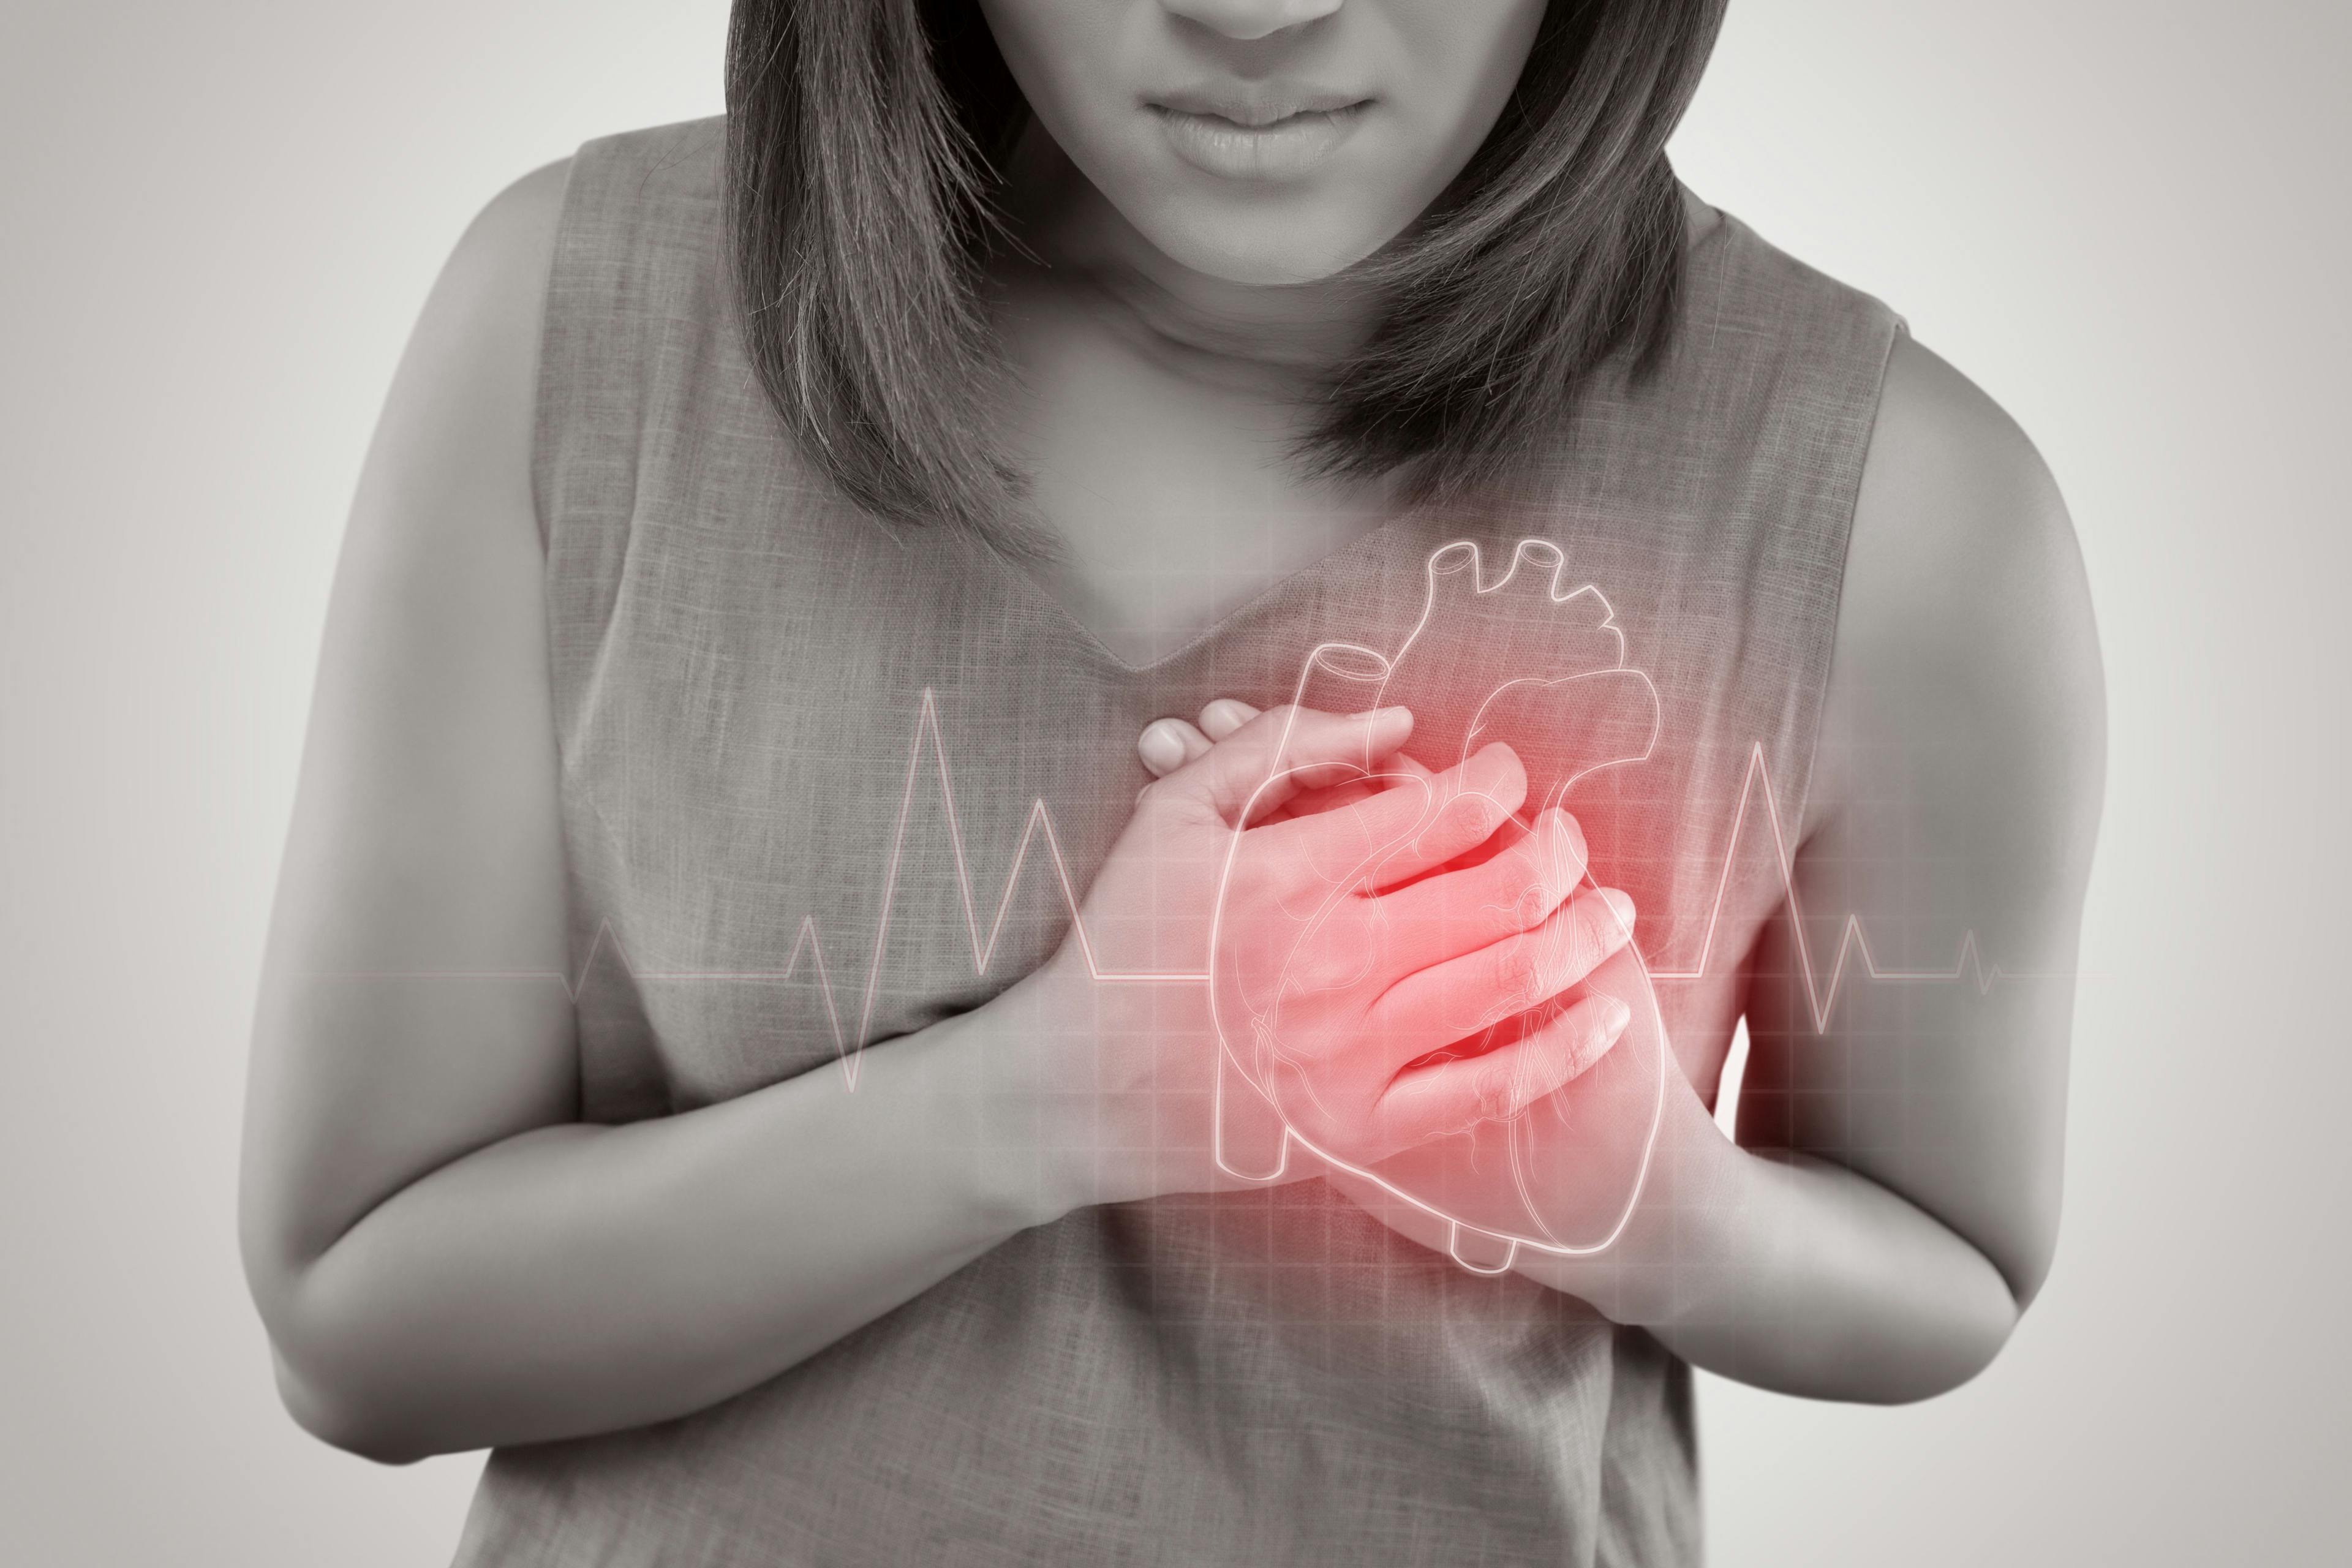 Why Do Women With Heart Failure Have Poorer Quality of Life?